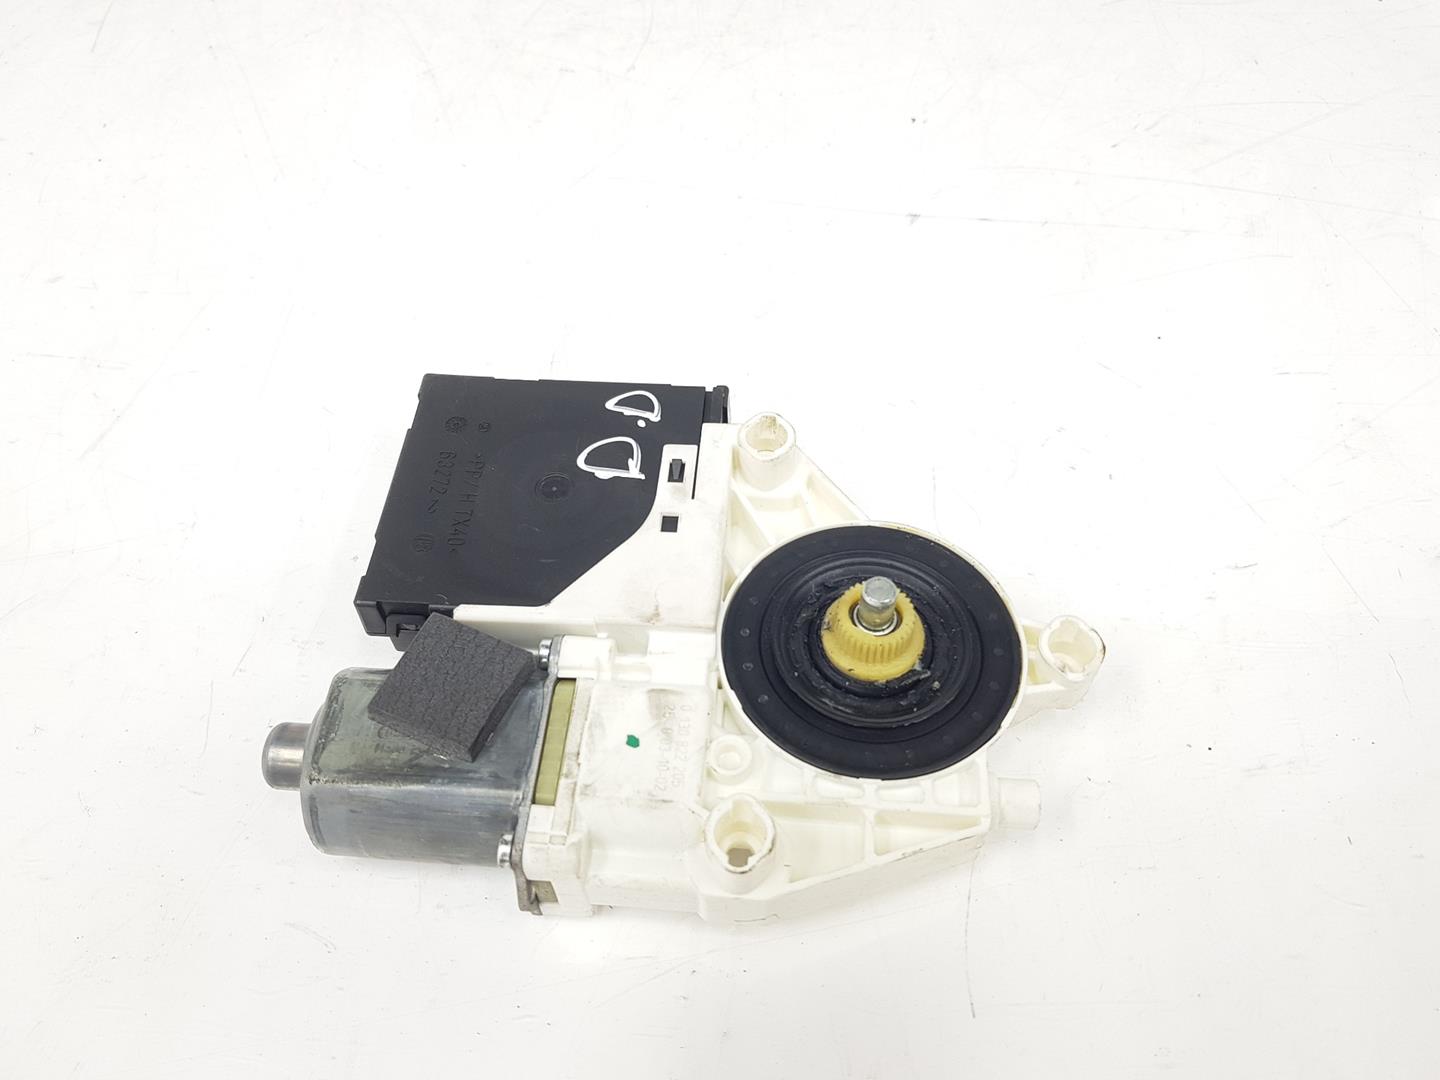 AUDI A2 8Z (1999-2005) Front Right Door Window Control Motor 8P0959802A, 8P0959802A 19937471